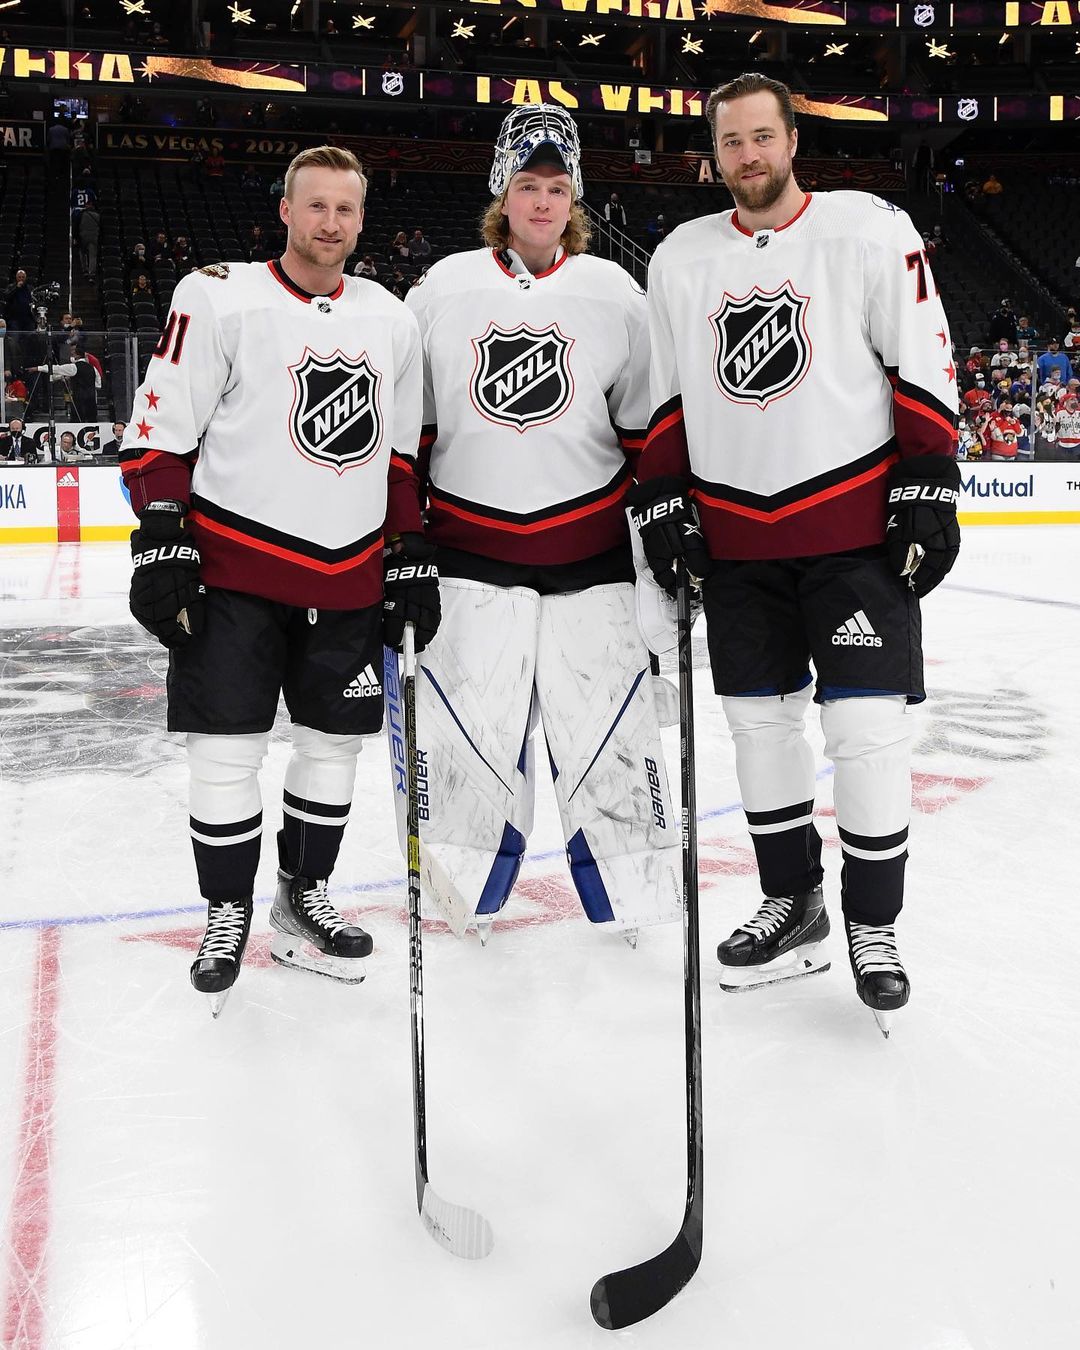 the trio from tampa ...